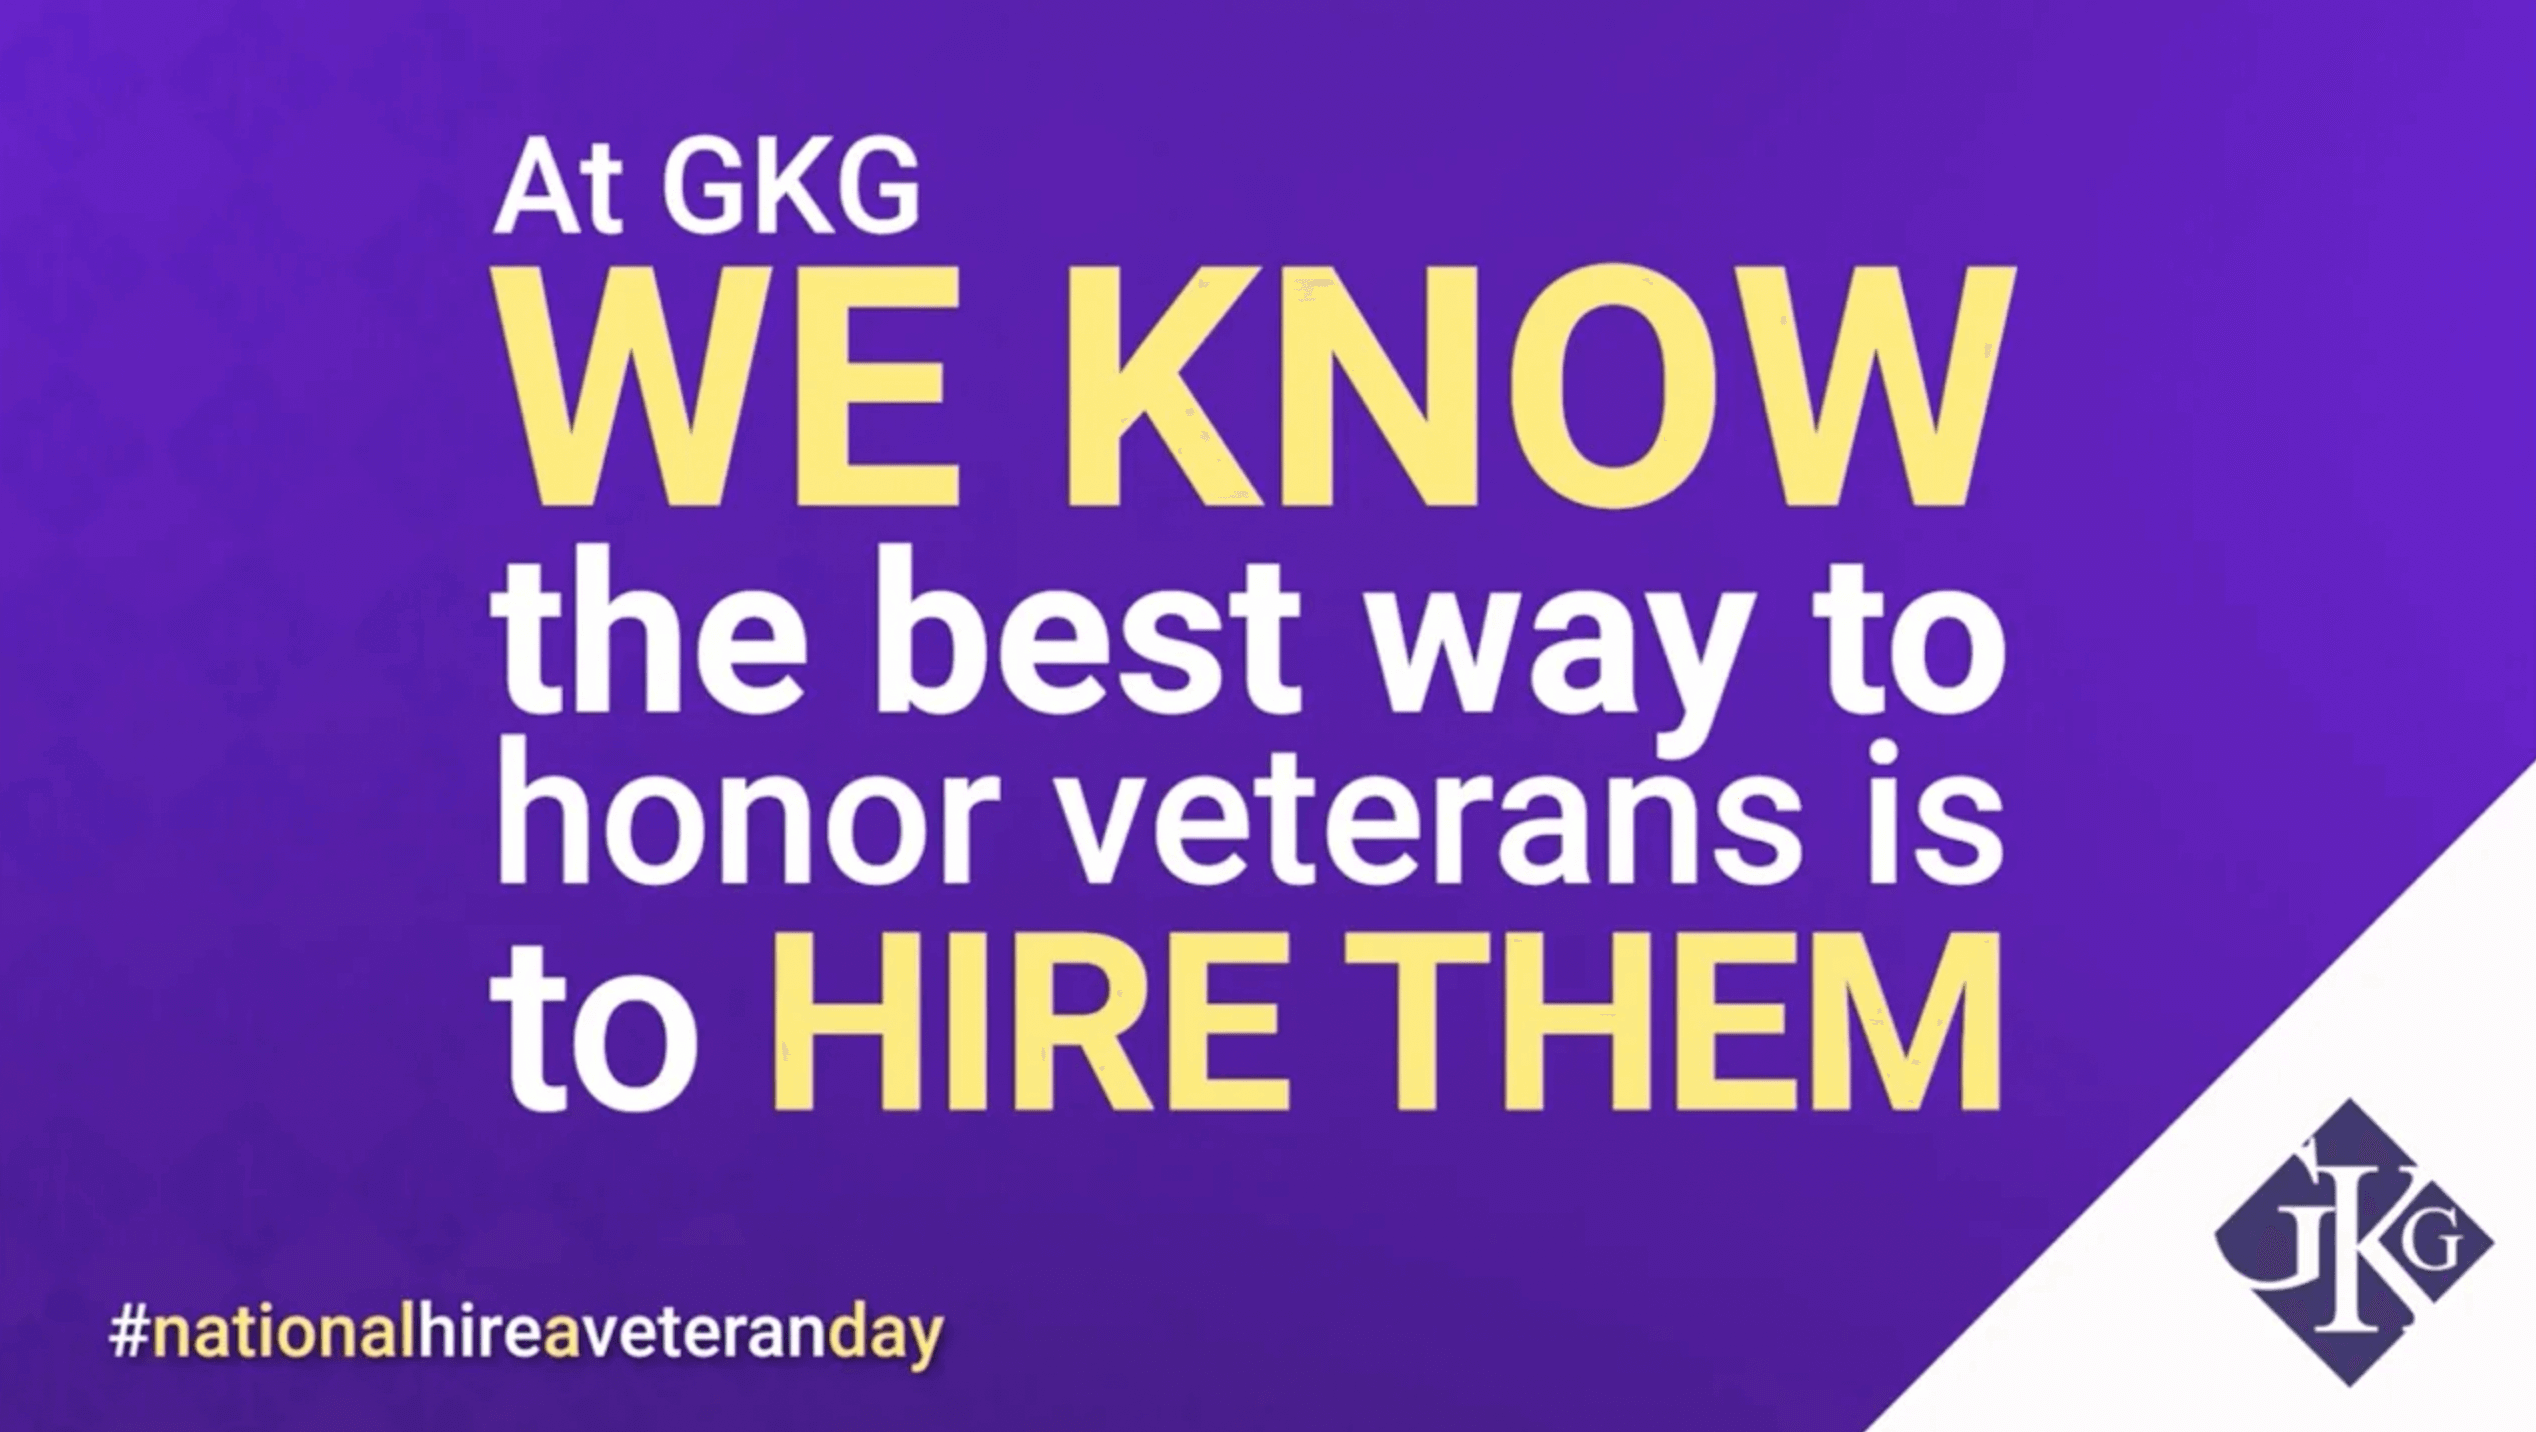 At GKC We know the best way to honor veterans is to hire them. #nationalhireaveteranday